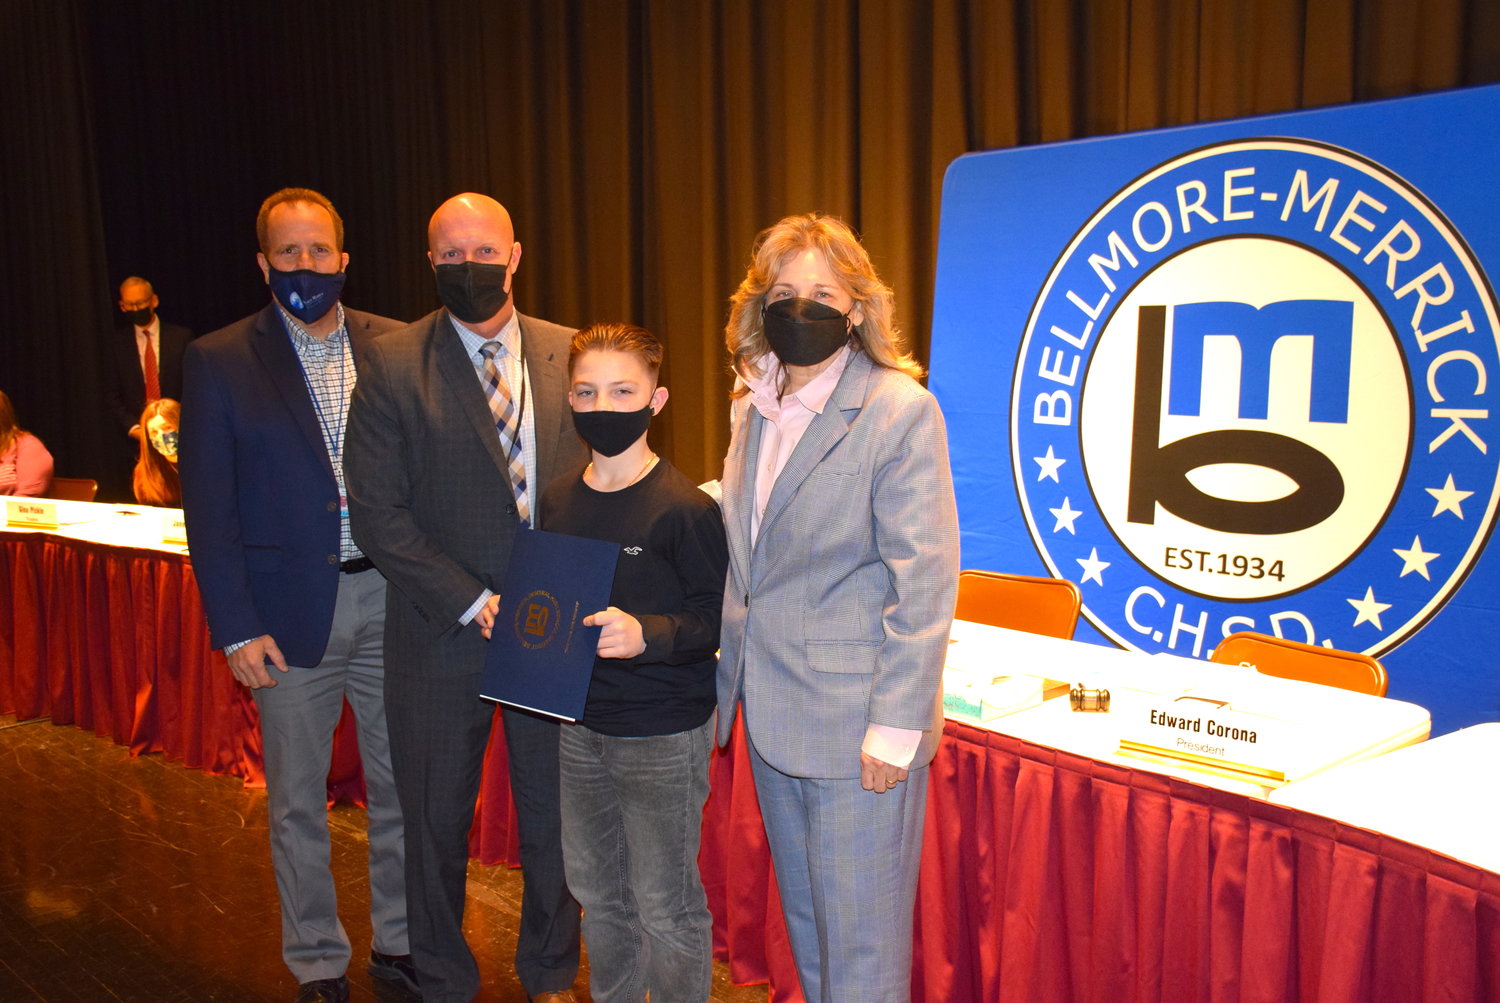 Grand Avenue Middle School eighth grader Luke Fischetti was honored by the Bellmore-Merrick Board of Education at their Jan. 12 meeting for his volunteerism during the Bellmore Lions Club Polar Express event held in early December. 